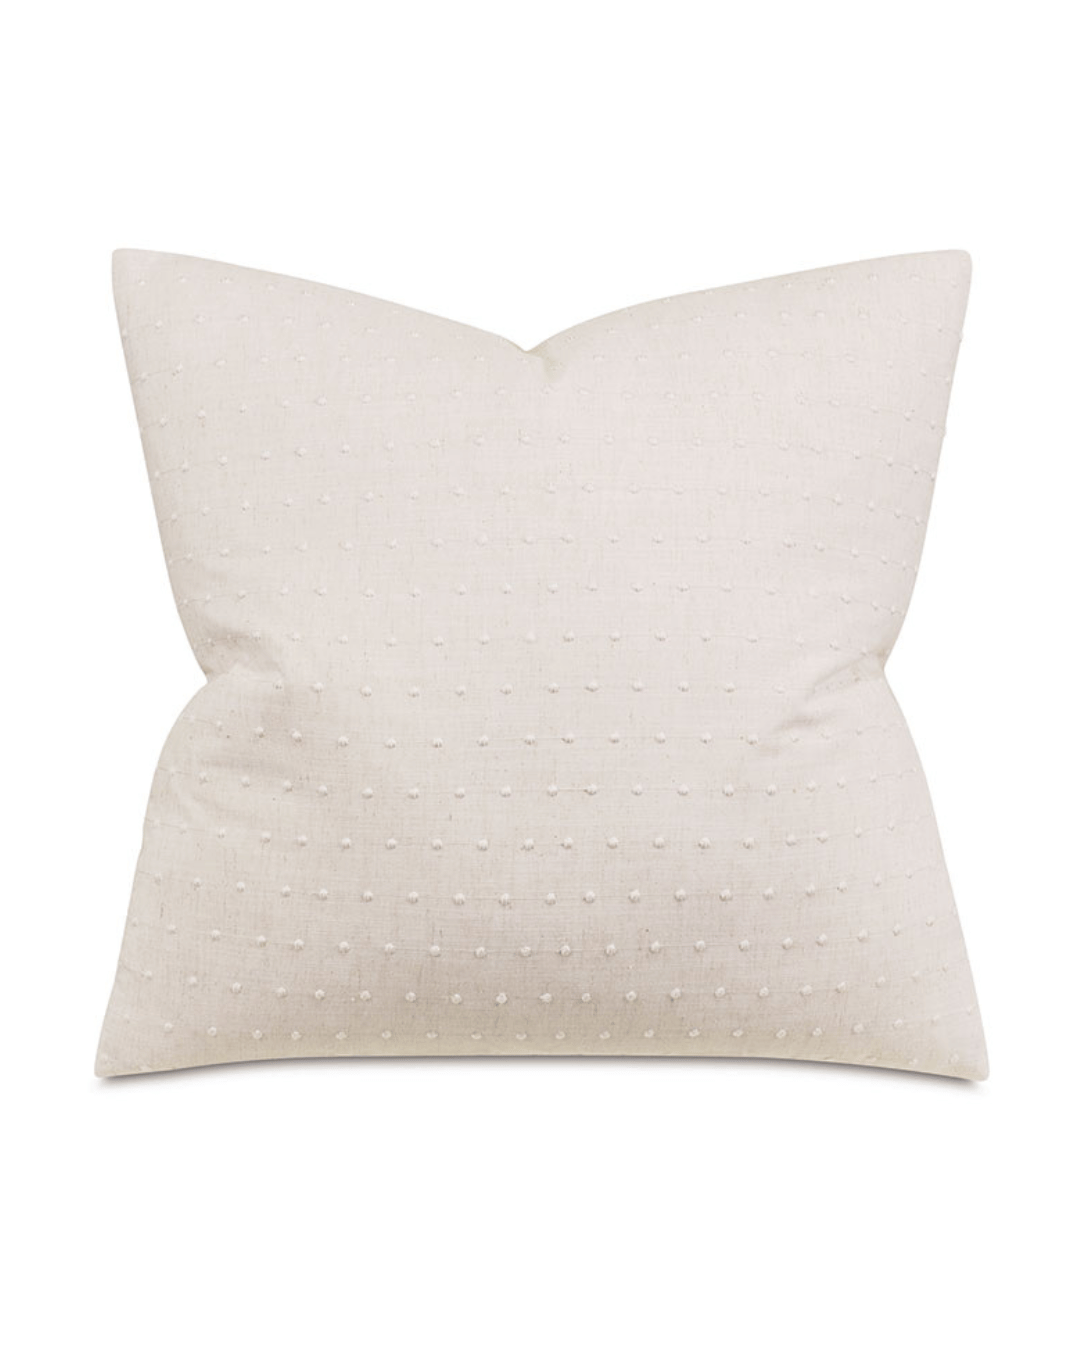 A square, ivory-colored Dotted Decorative Pillow in Bungalow style, displayed against a white background by Eastern Accents.